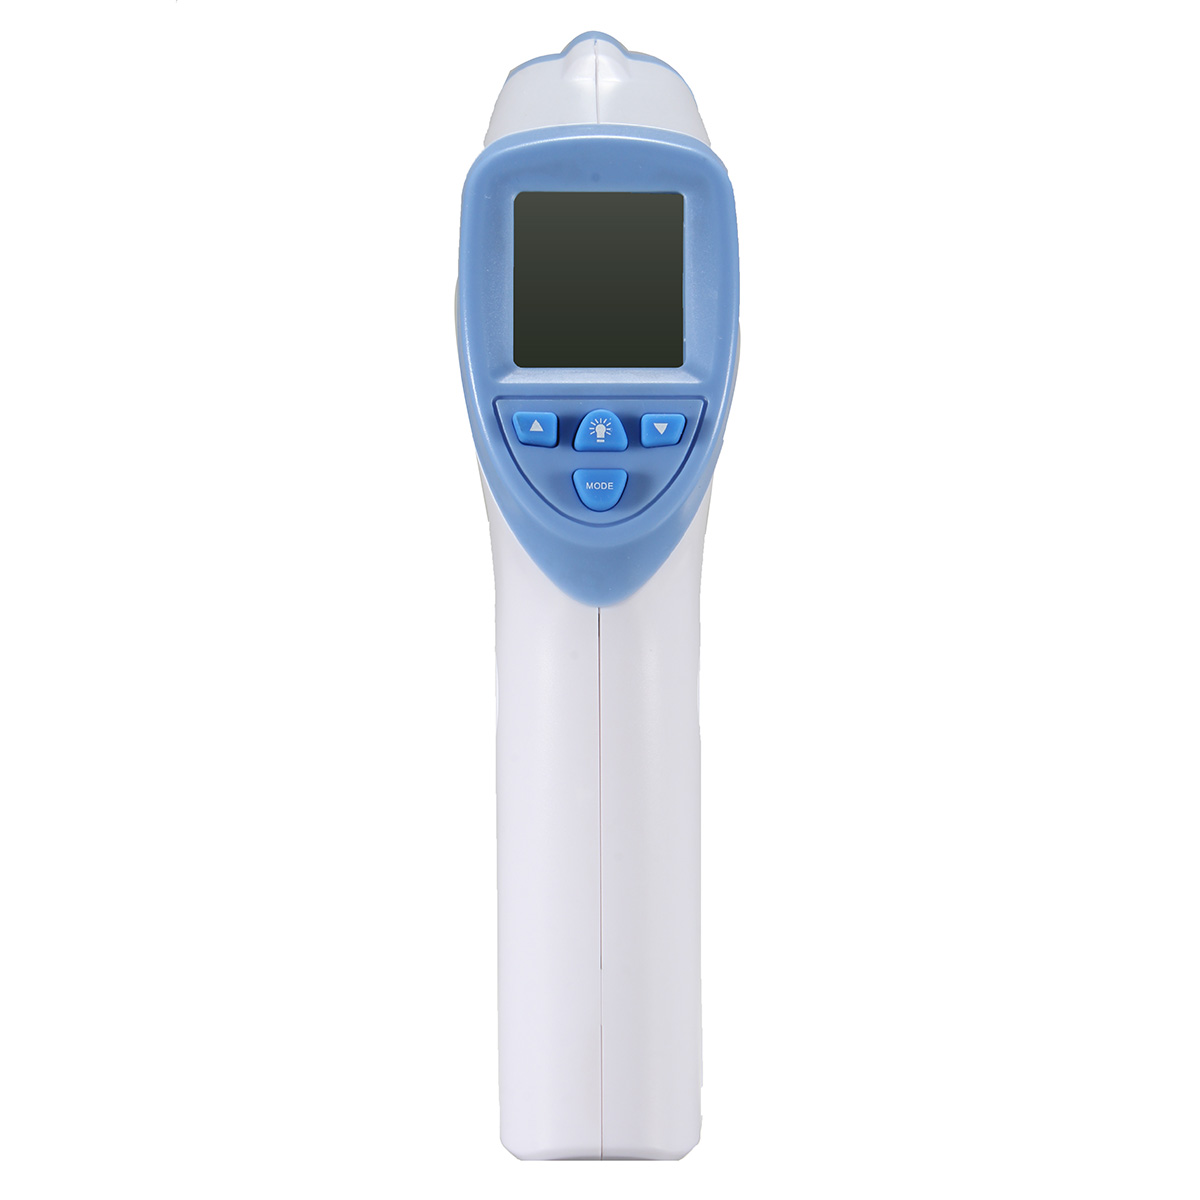 Digital-Non-Contact-No-Touch-Infrared-Forehead-Thermometer-DigitalThermometer-Measuring-Range-32-425-1132170-6